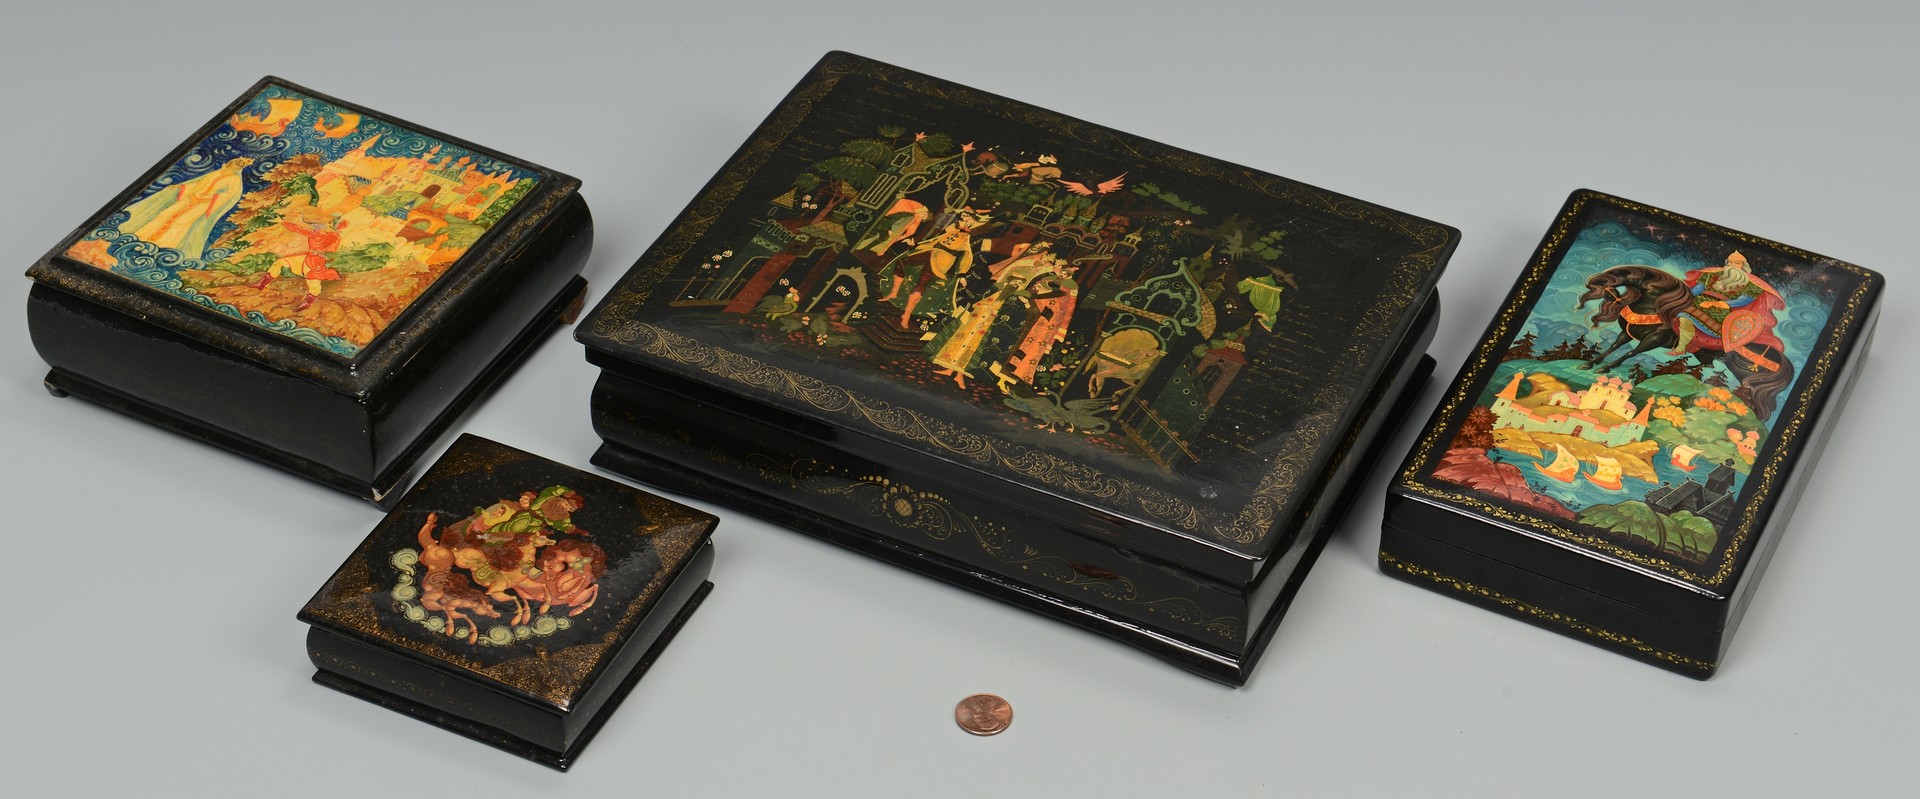 Lot 384: 4 Russian Lacquer Boxes